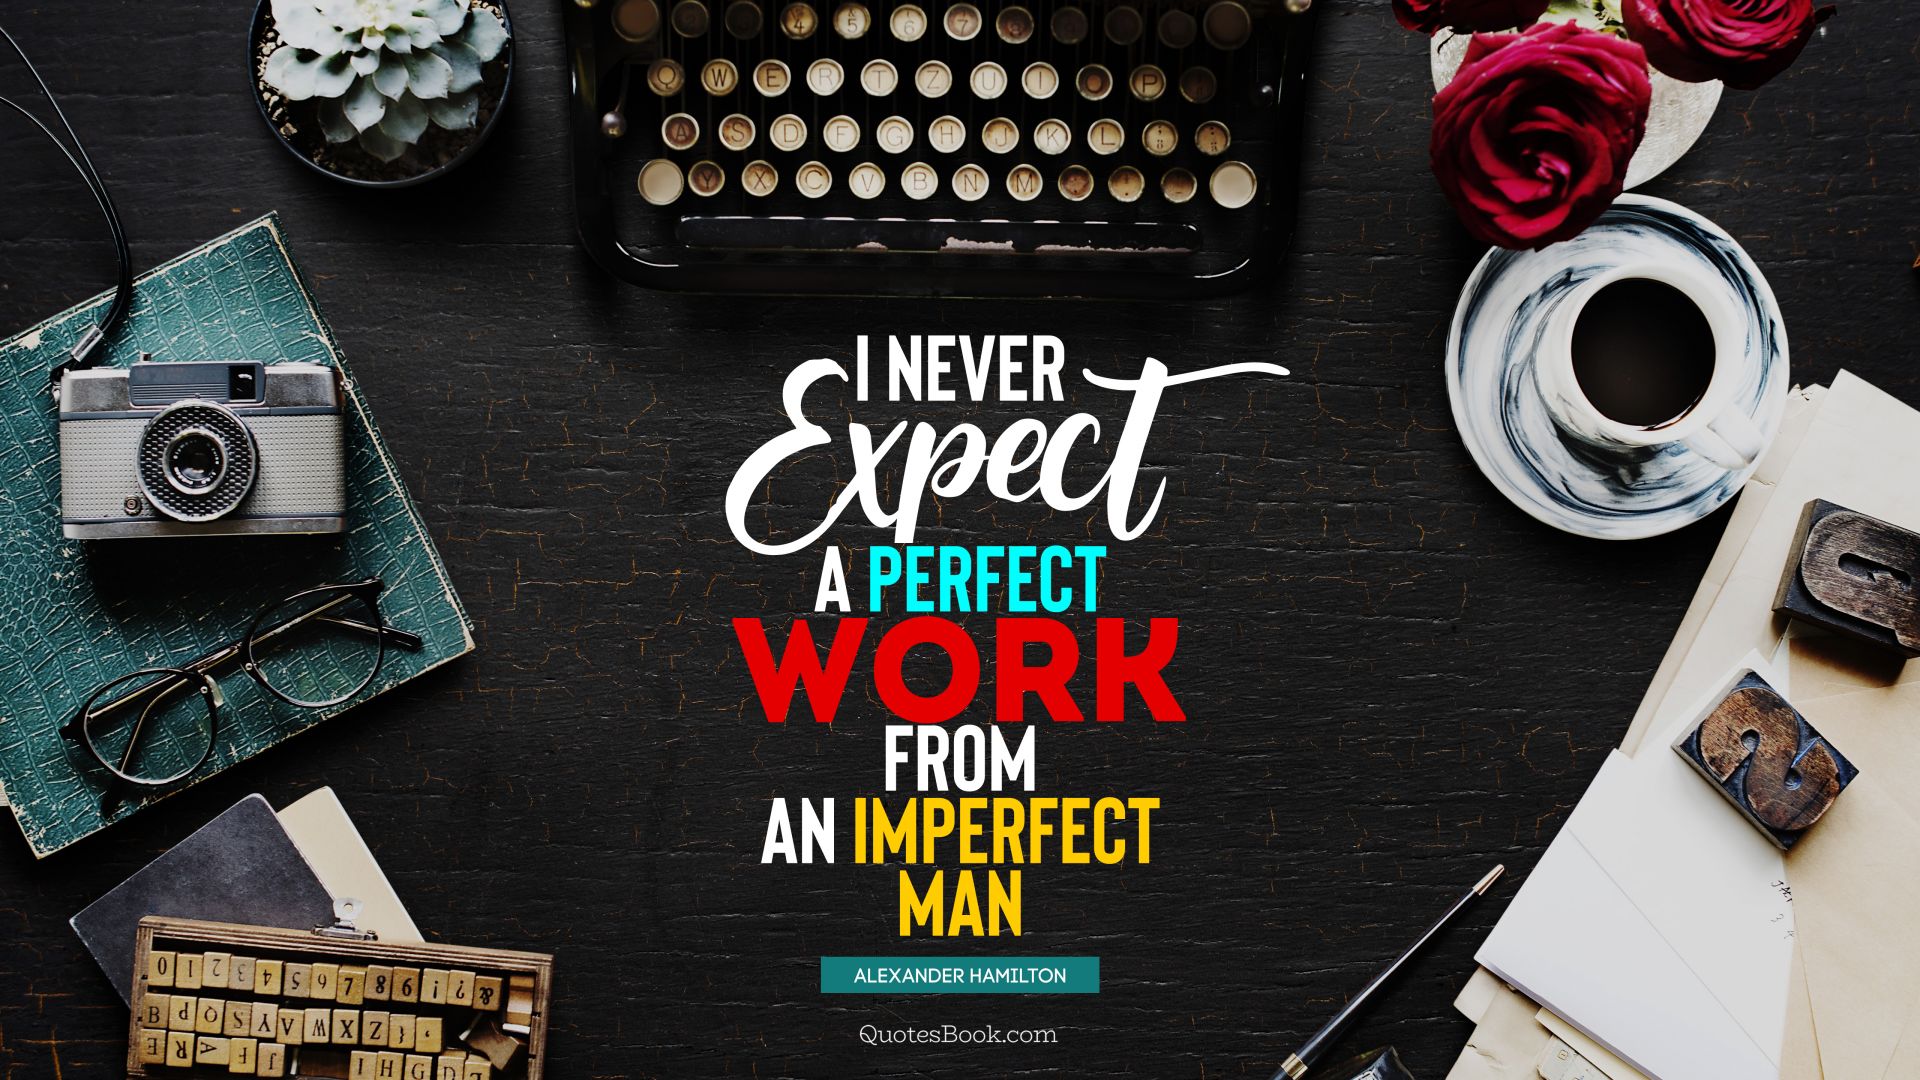 I never expect a perfect work from an imperfect man. - Quote by Alexander Hamilton